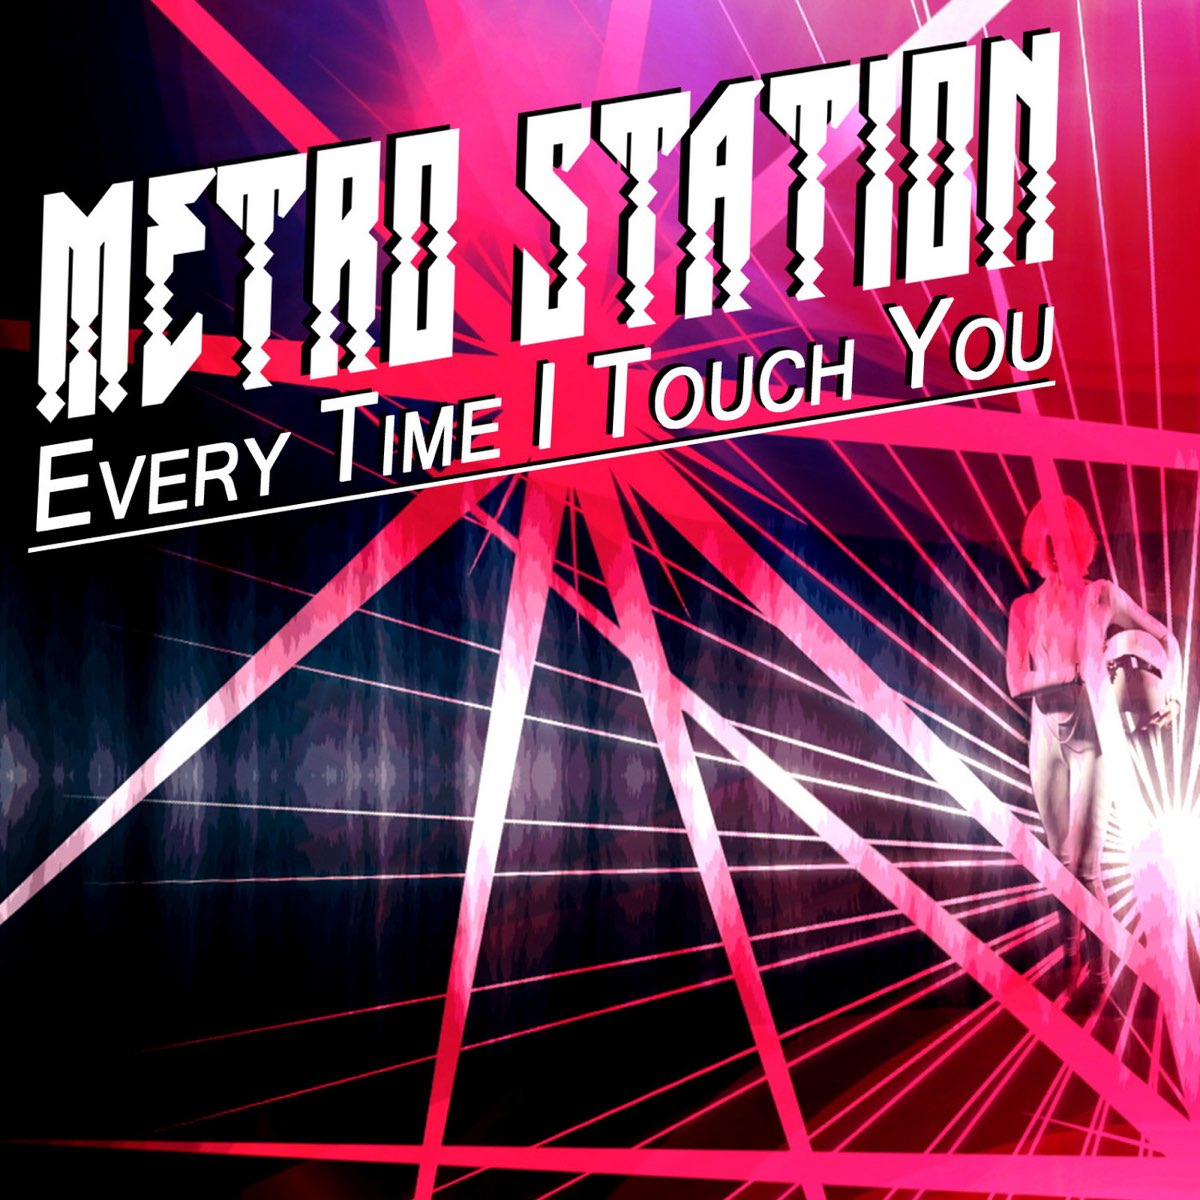 Every time. Touch you. Touch you mp3. Обложки для песен с метро.